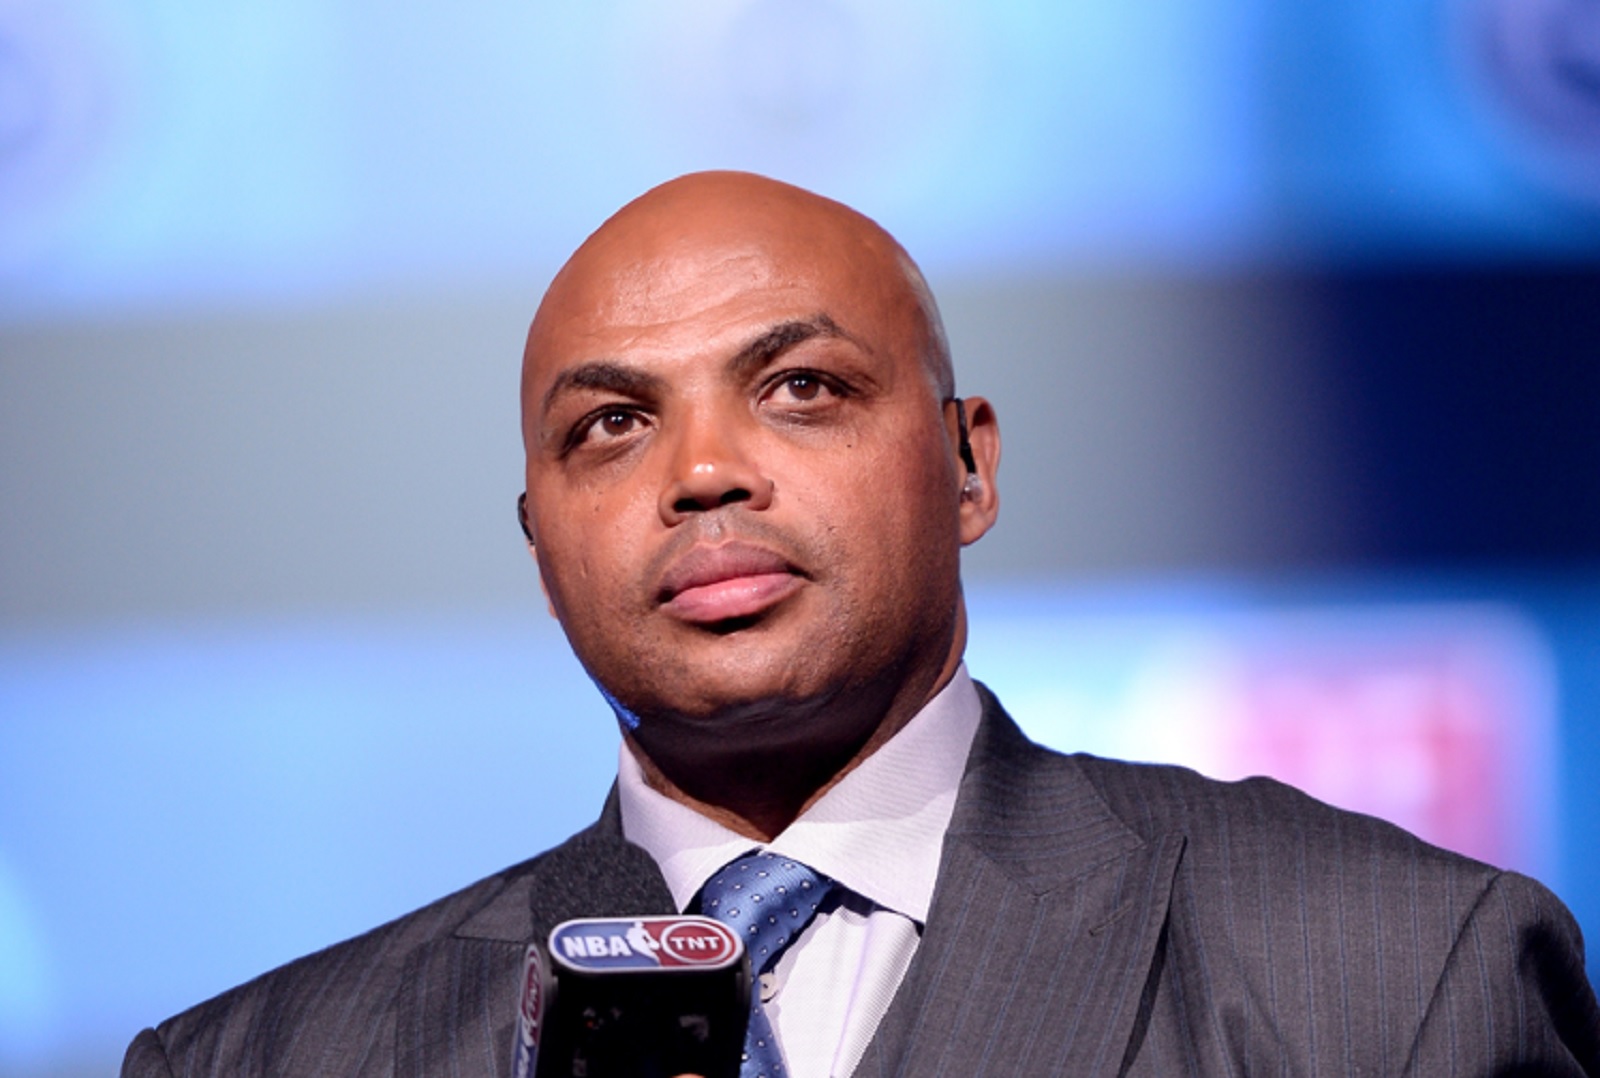 Charles Barkley Wants People To Drink Bud Light Shows Support For Lgbtq If You Have A Problem 